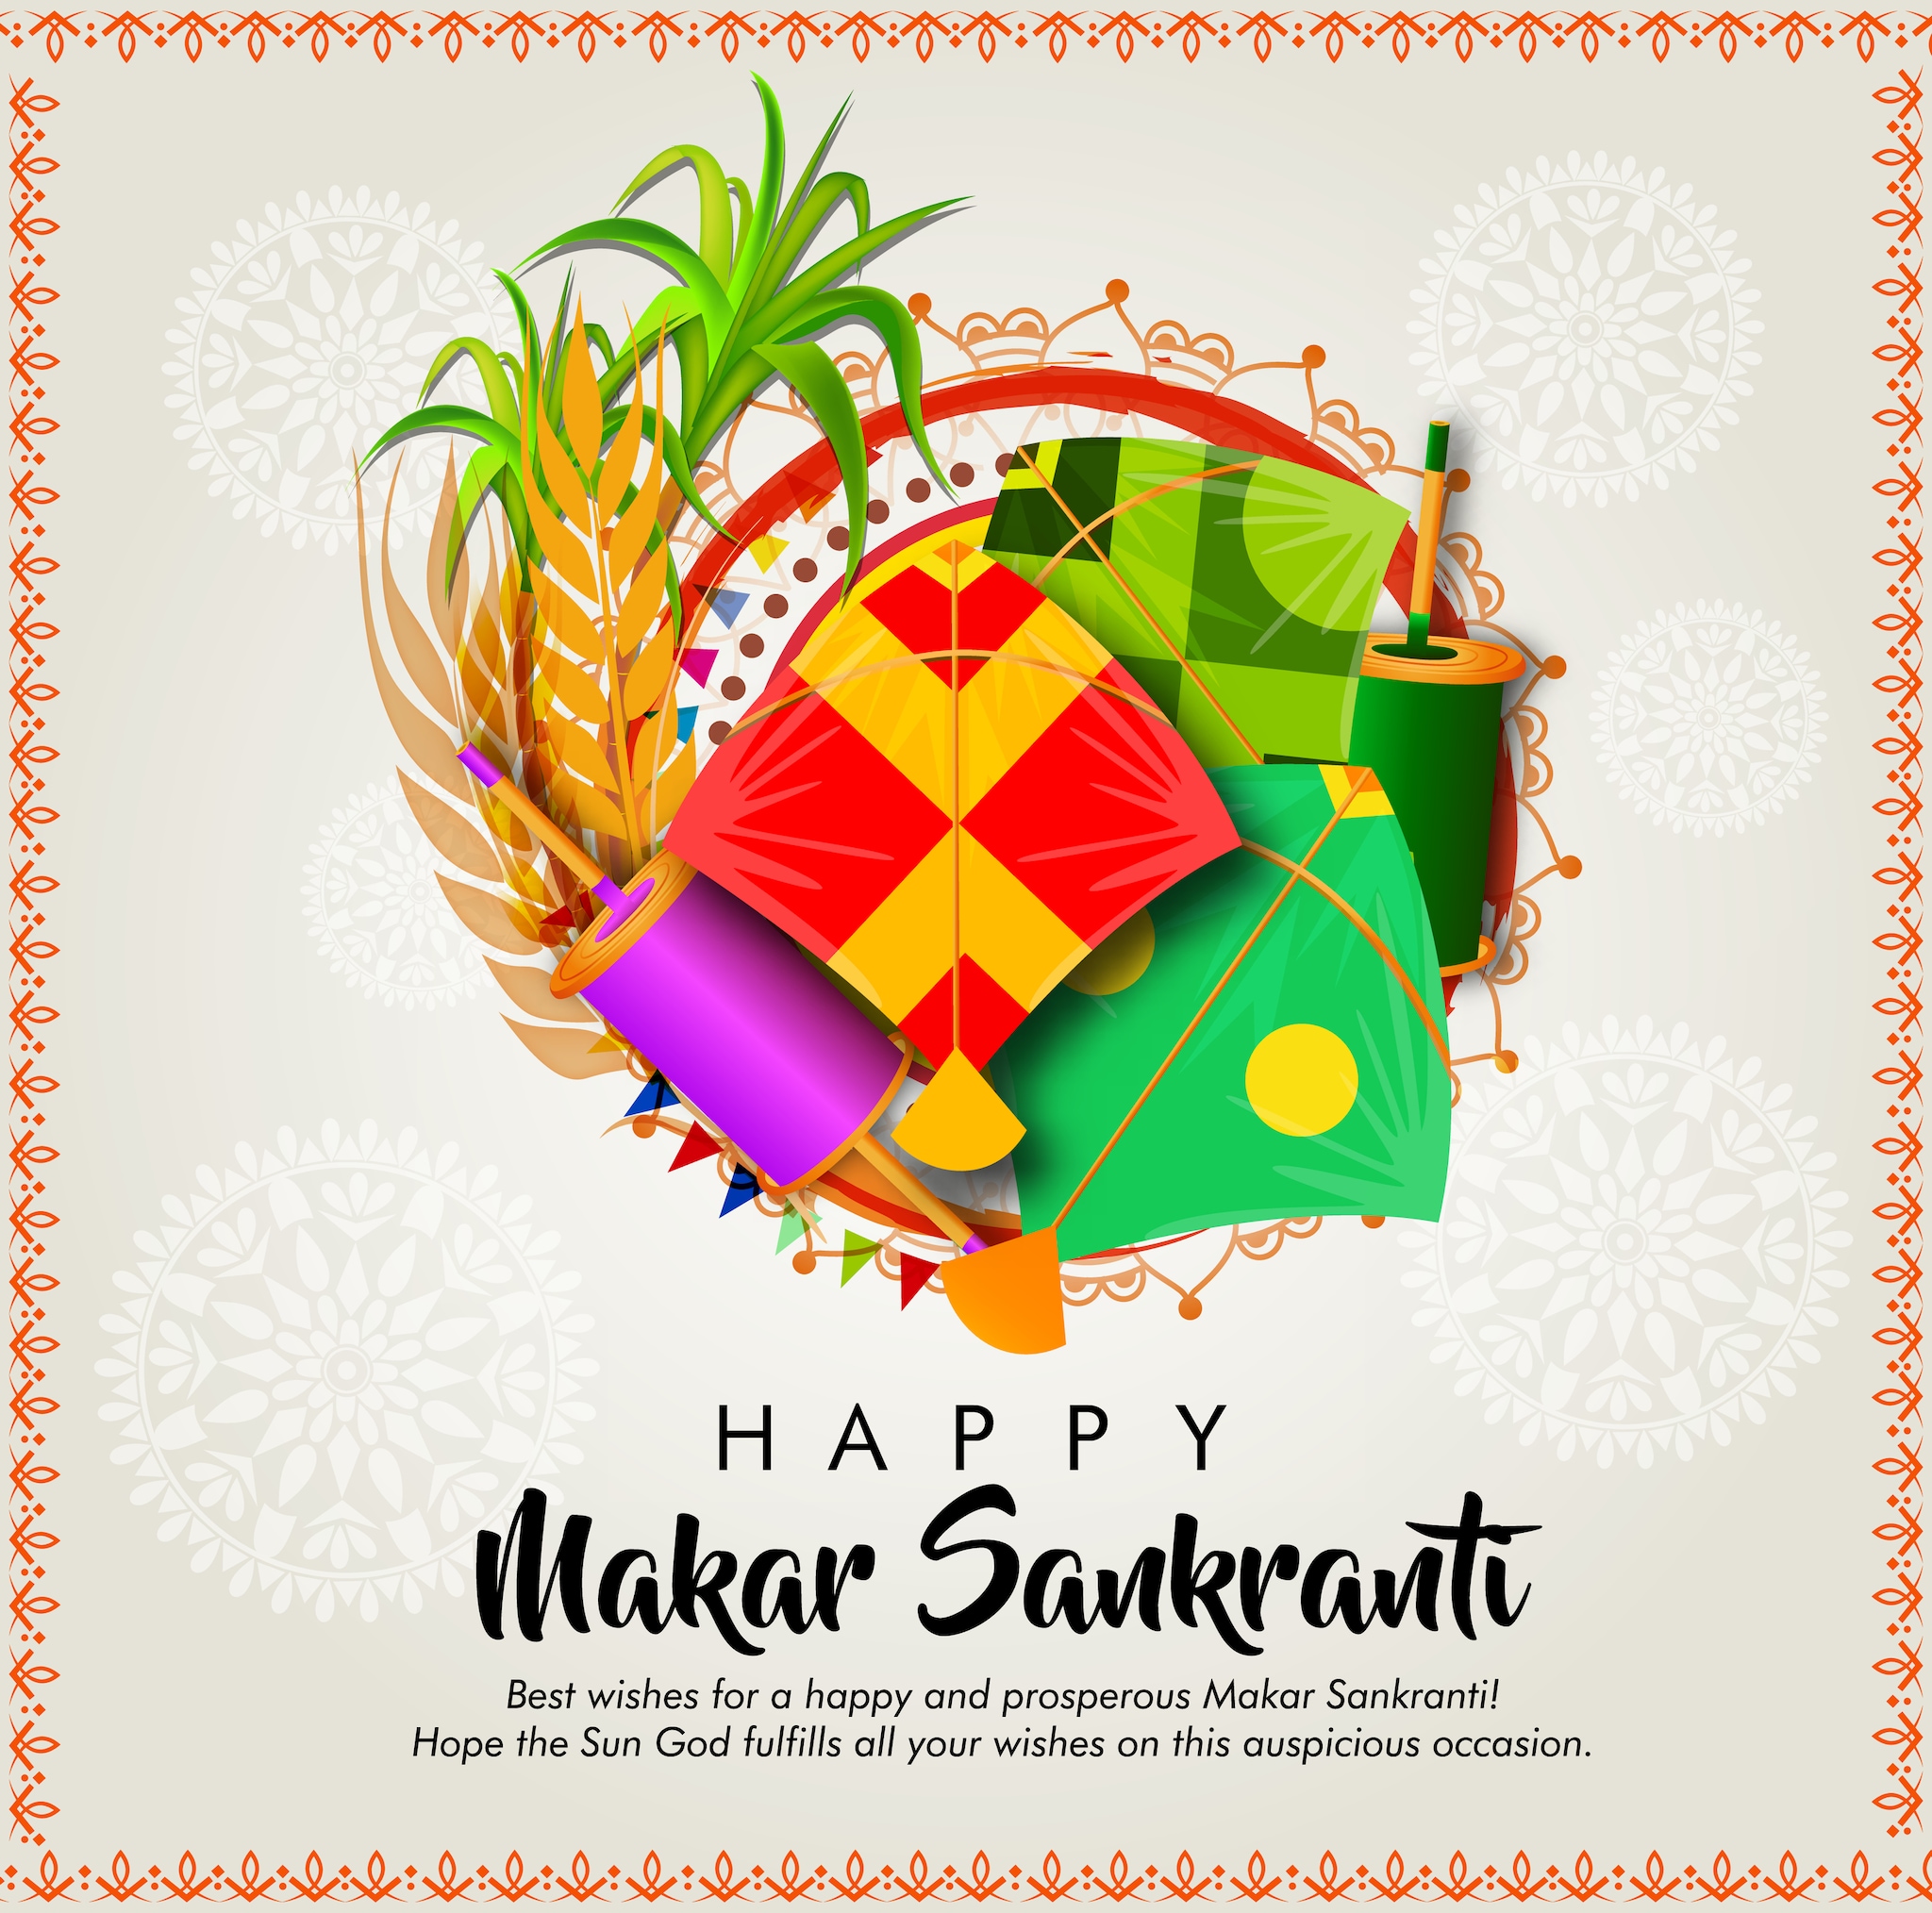 Happy Makar Sankranti 2022 Wishes, Images, Quotes, Messages and